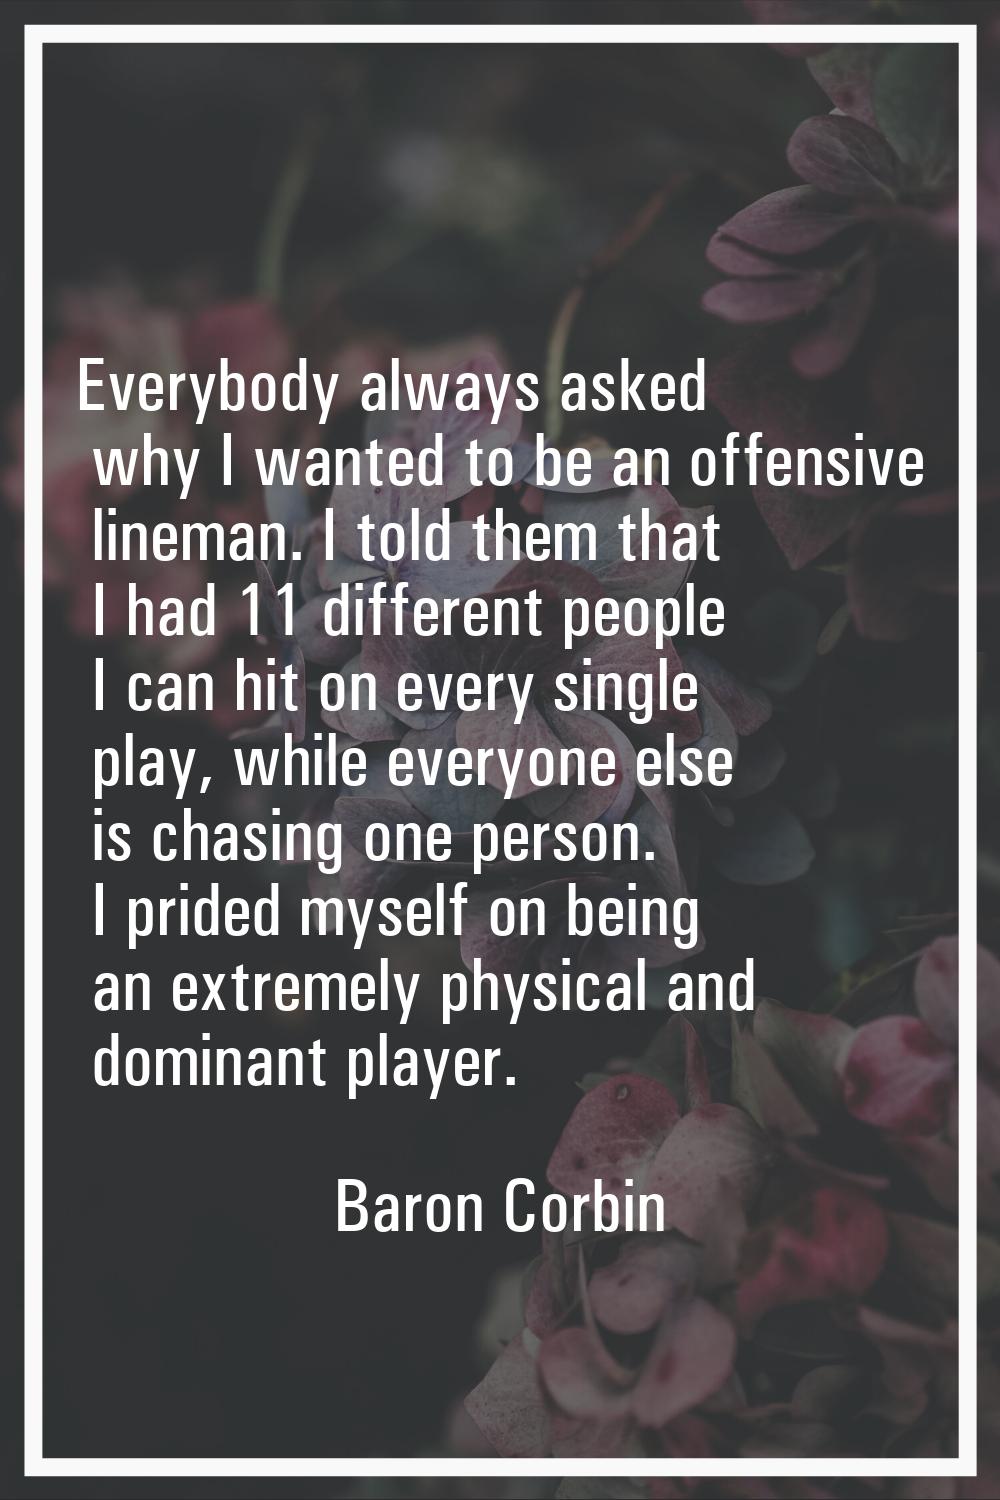 Everybody always asked why I wanted to be an offensive lineman. I told them that I had 11 different